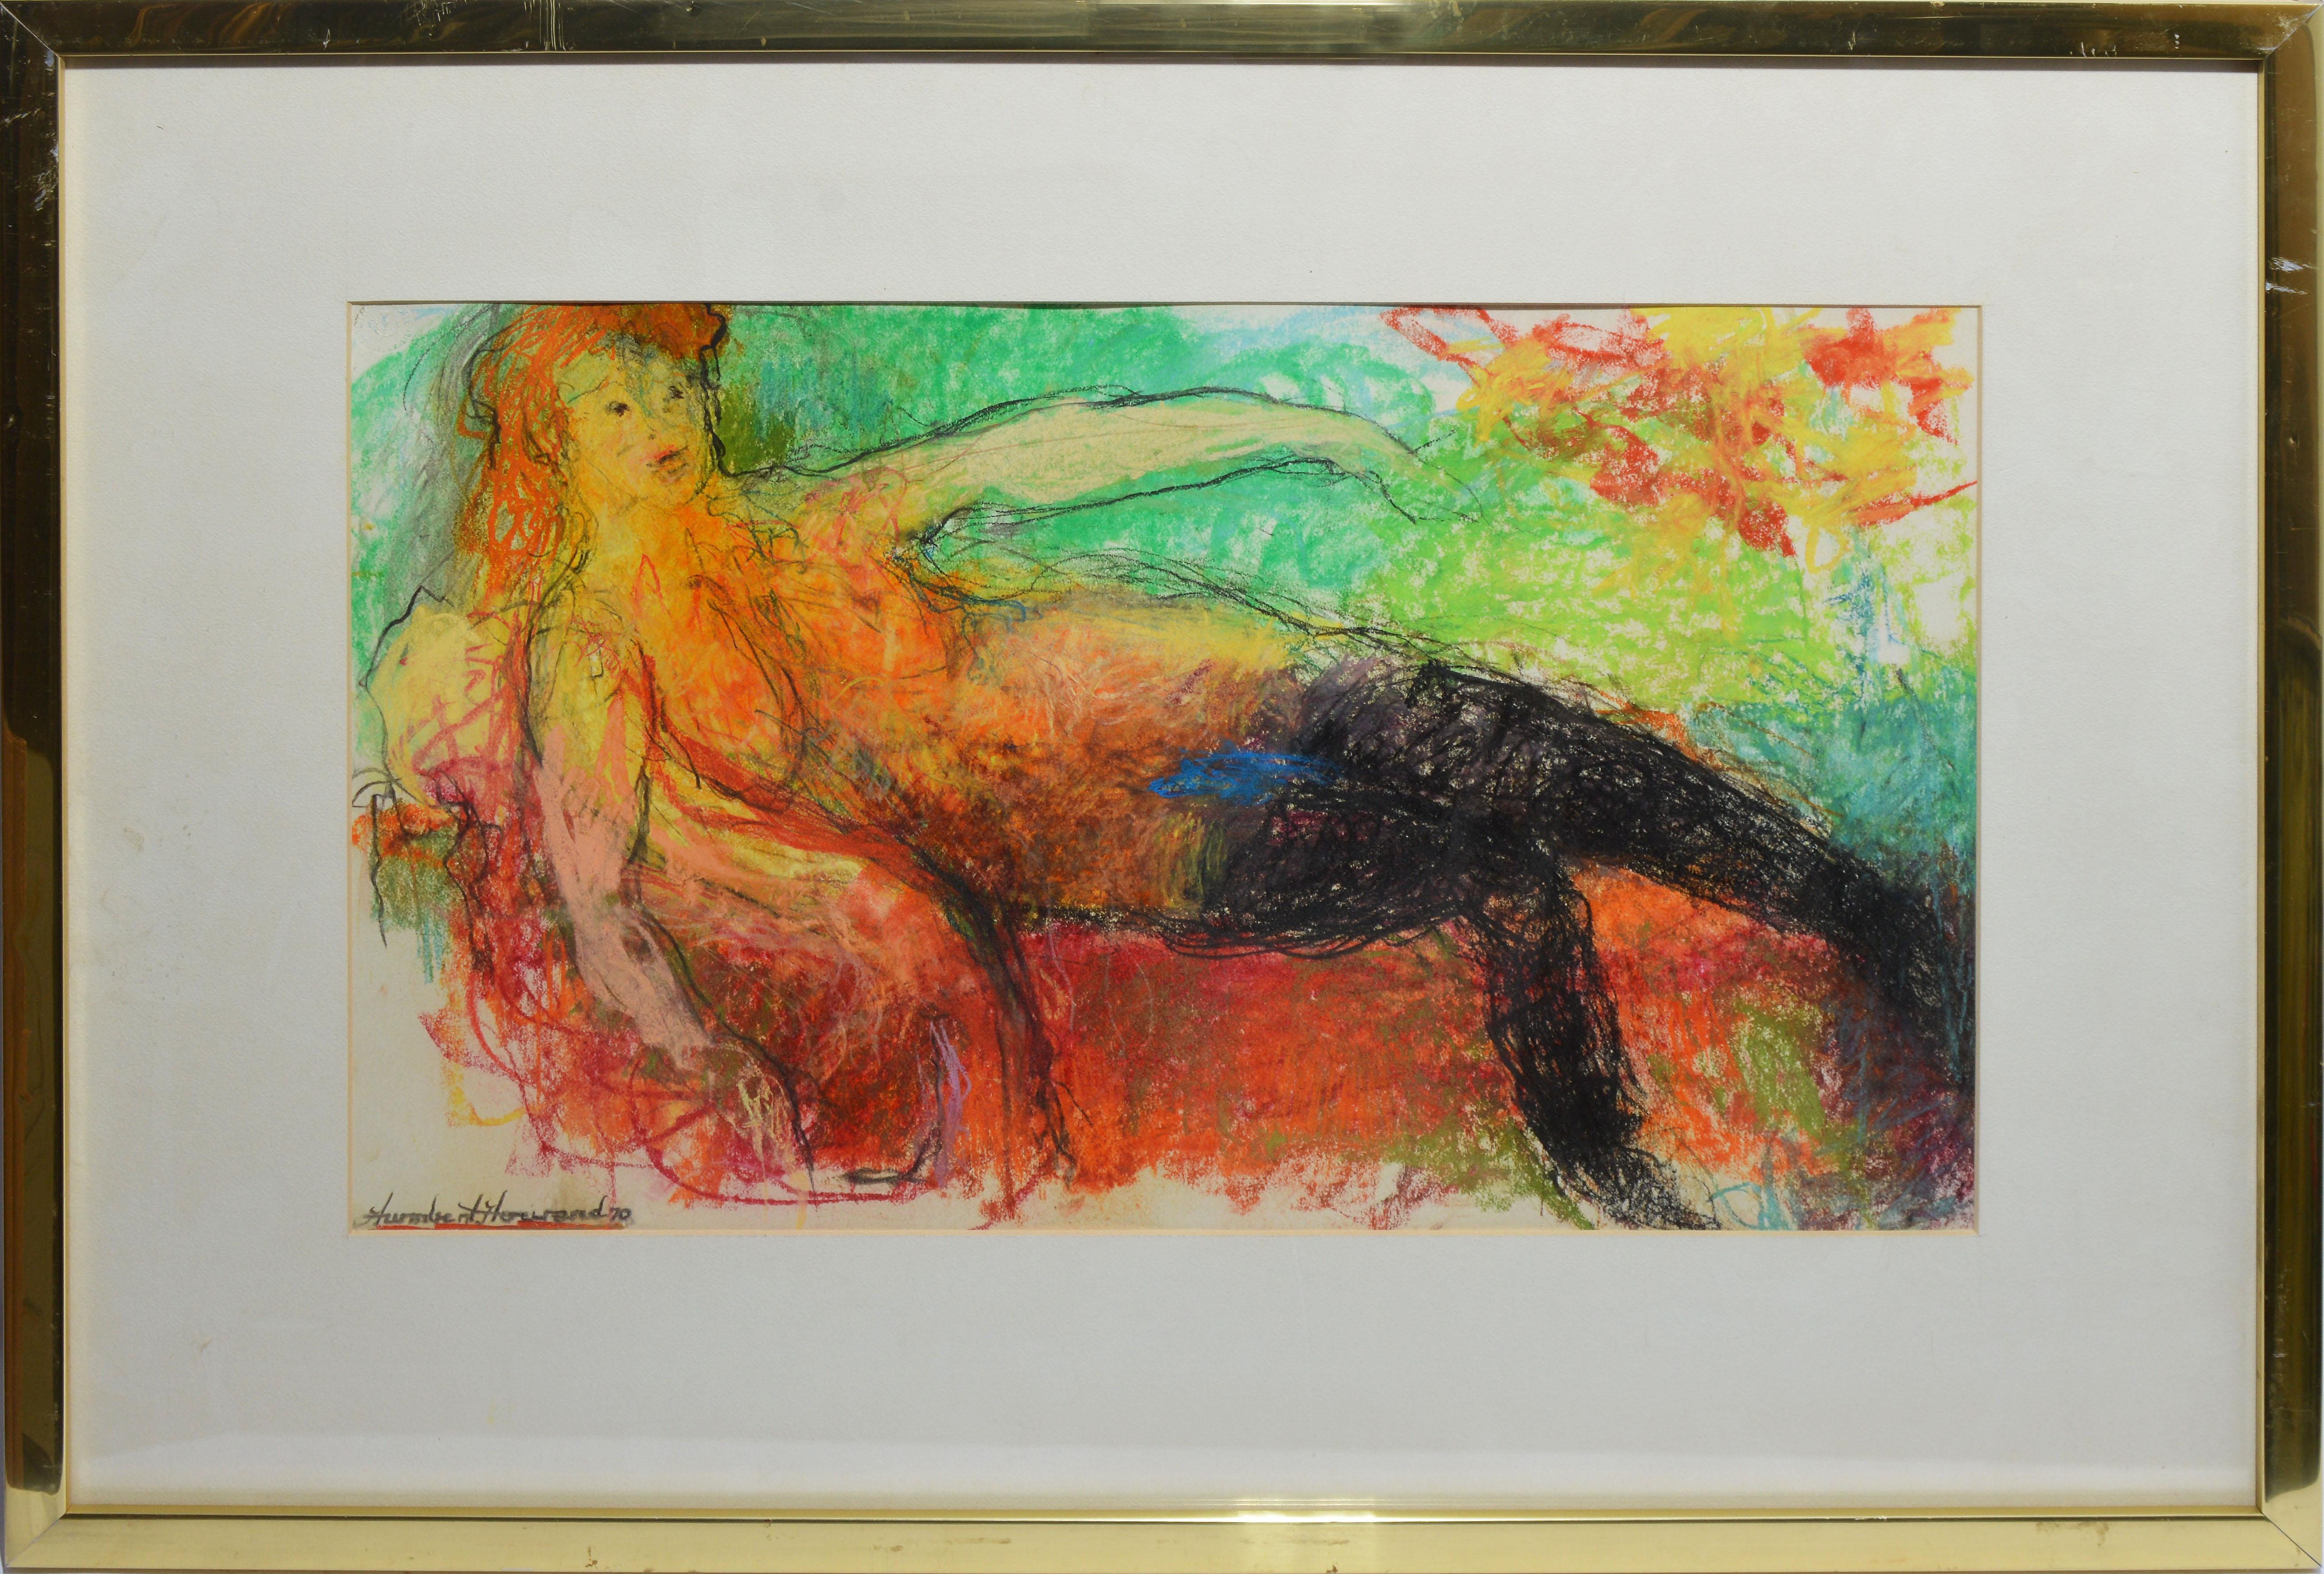 Vintage American modernist painting by Humbert Howard  (1905 - 1990).  Watercolor and gouache on paper, circa 1970.  Signed.  Displayed in a gold frame.  Image, 22"L x 14"H, overall 31"L x 23"H.